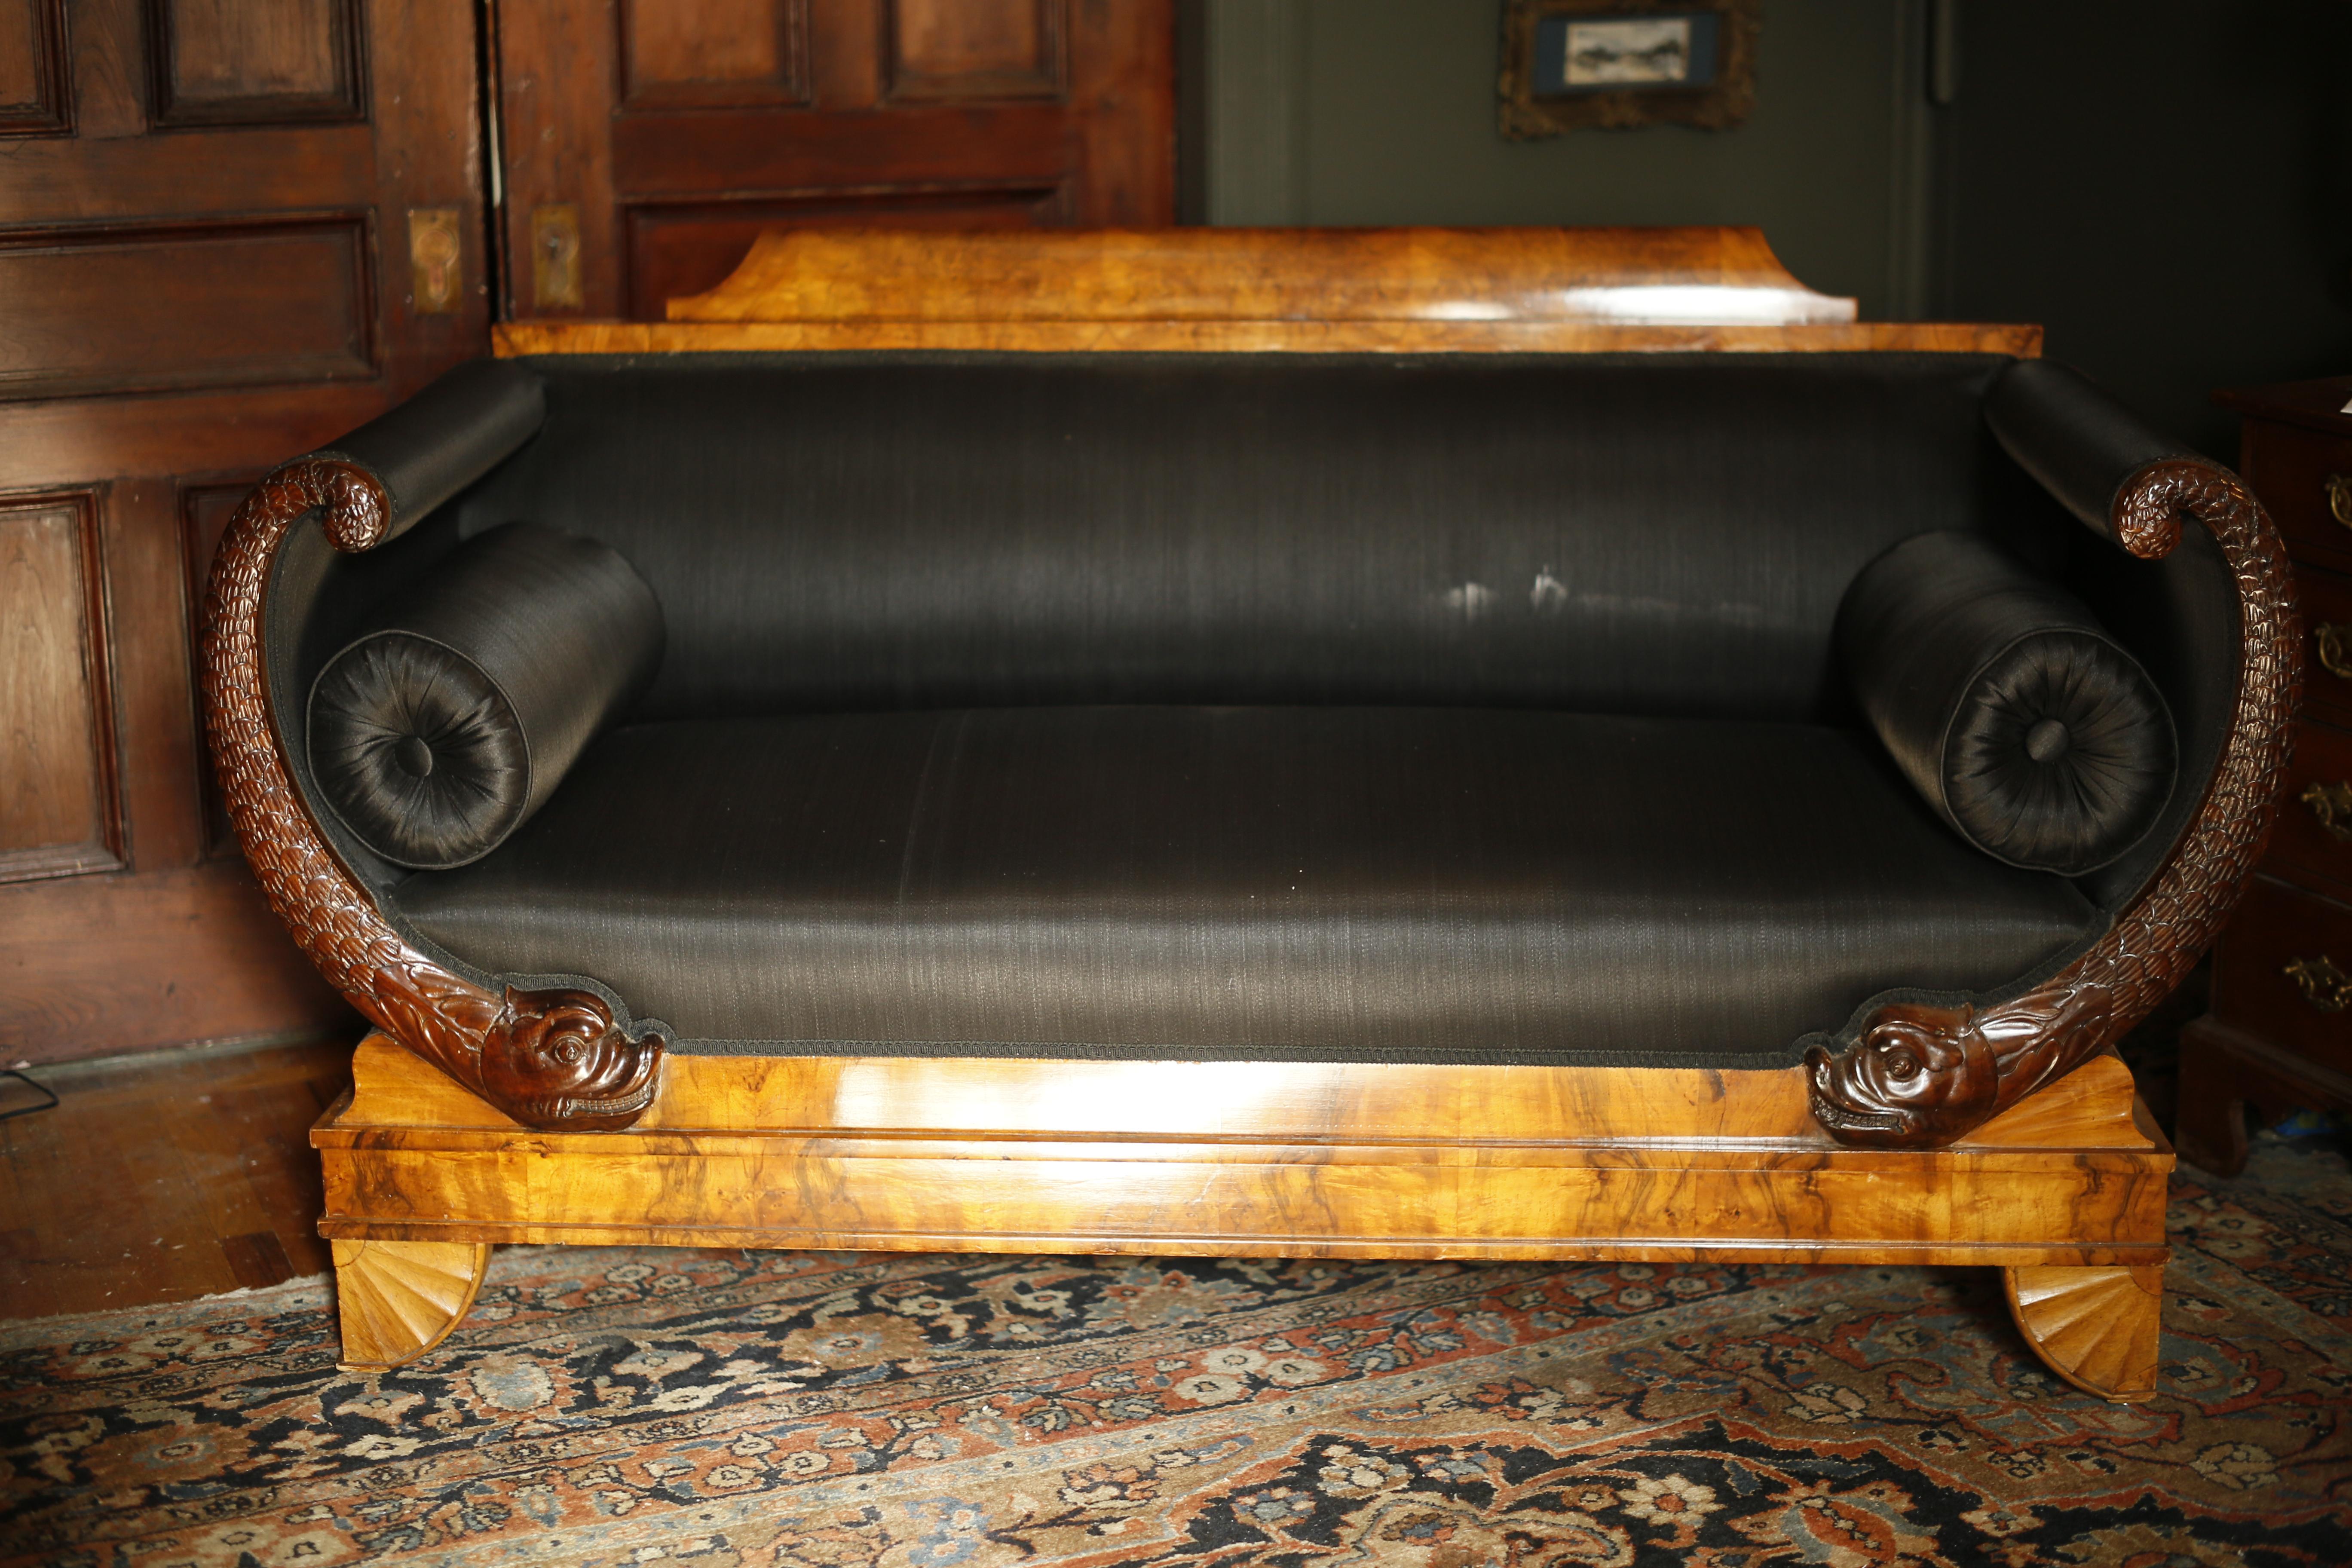 A magnificent piece of classical seating of ample proportions and fine detail. The couch frame is covered in beautiful burled walnut veneer and the arced arm supports are faced with stunning carved mahogany dolphins. The sofa is supported by a